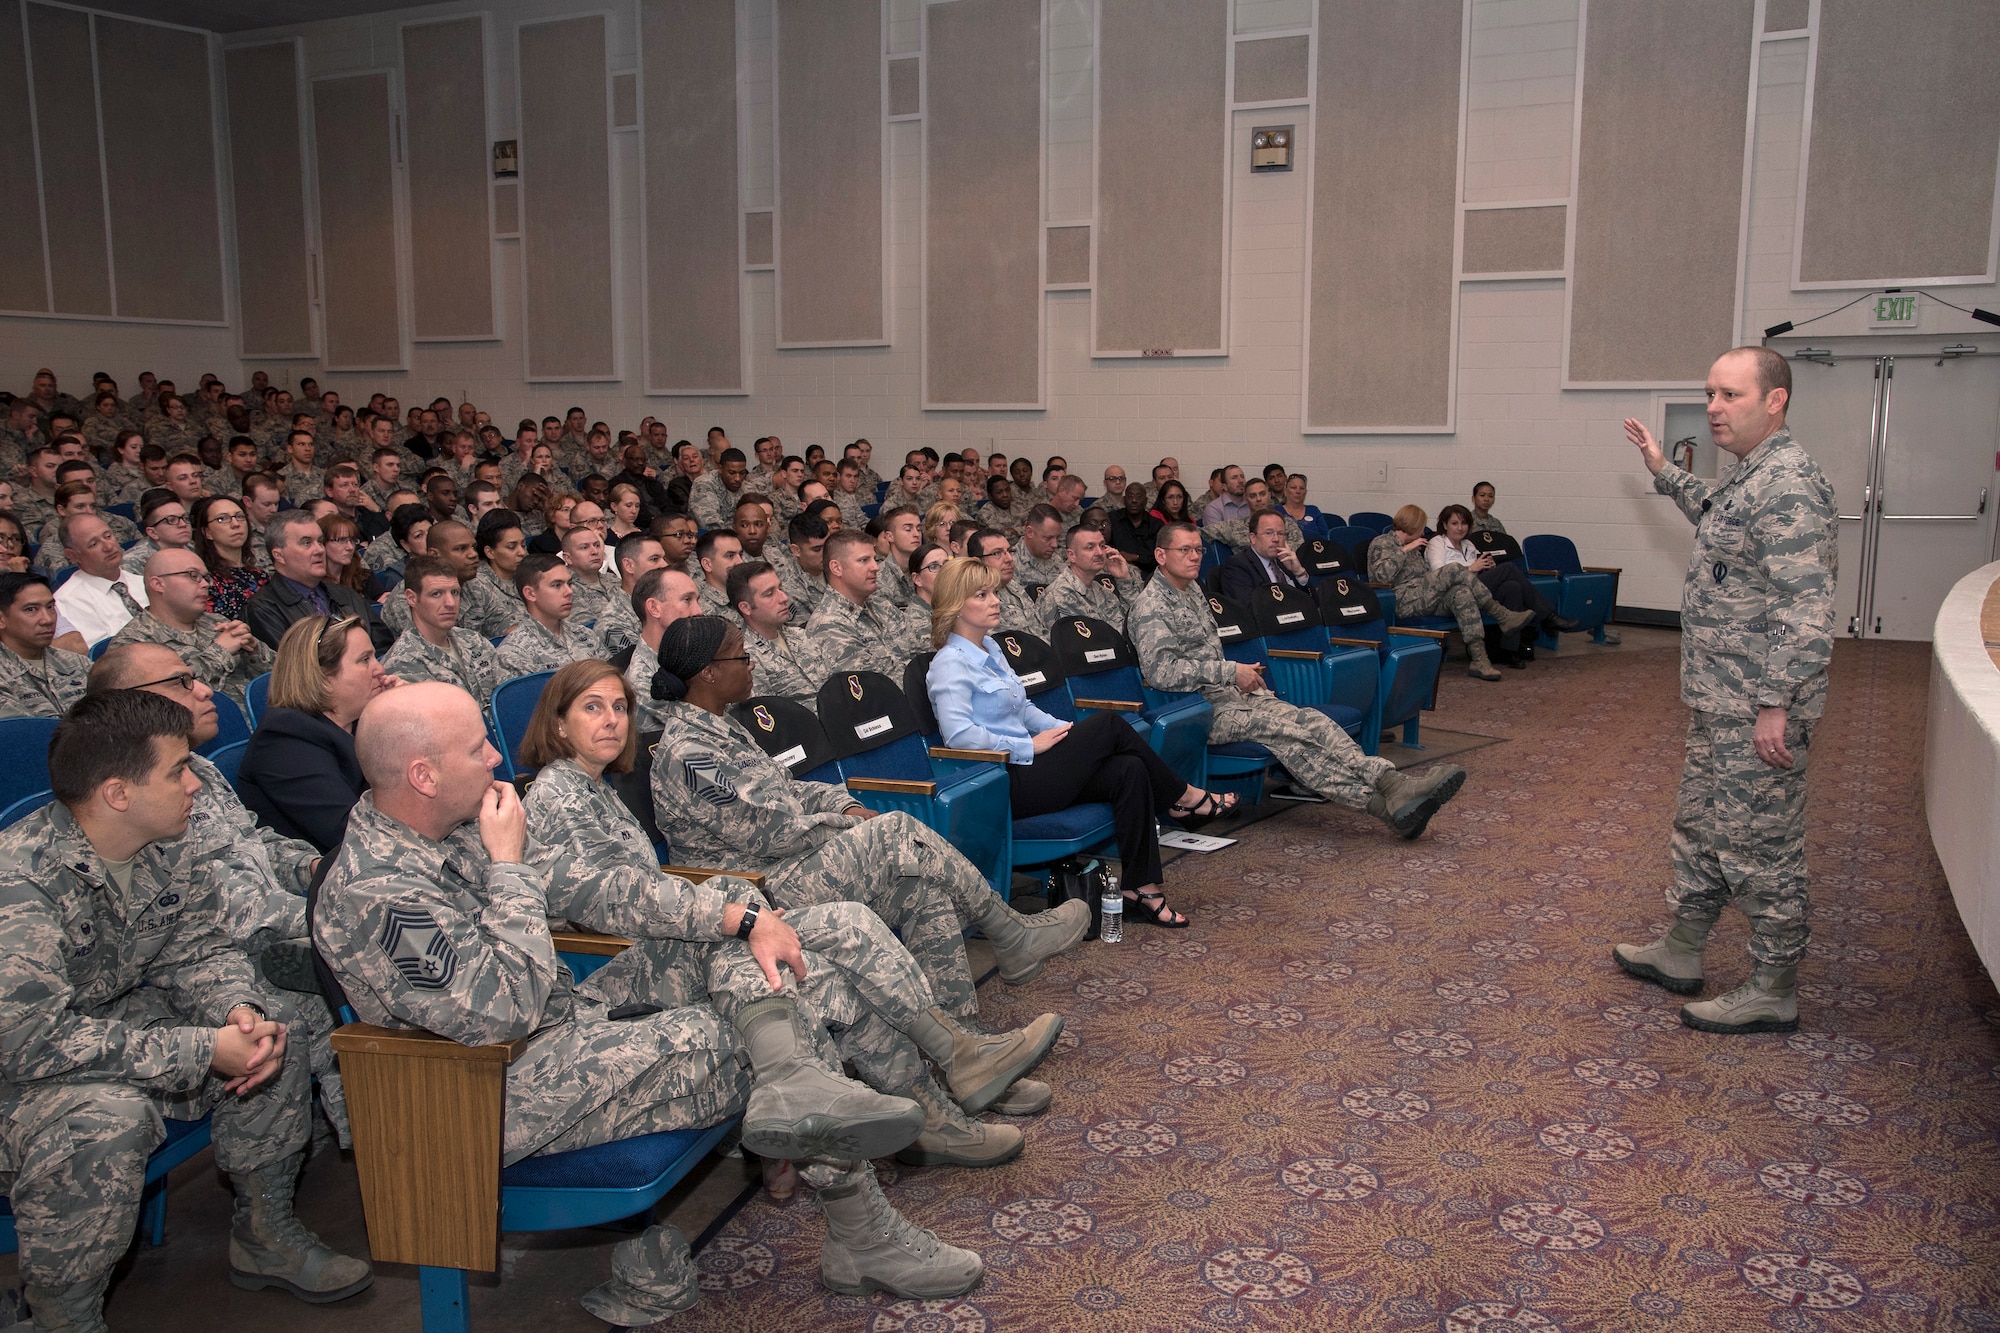 PETERSON AIR FORCE BASE, Colo. – Col. Douglas Schiess, 21st Space Wing commander speaks with Team Pete personnel during the morning commander’s call on April 21, 2016. The 21st Space Wing received the General Thomas S. Moorman Jr. Trophy from Gen. John E. Hyten, Air Force Space Command commander, for best overall wing in Air Force Space Command. (U.S. Air Force Photo by Craig Denton)